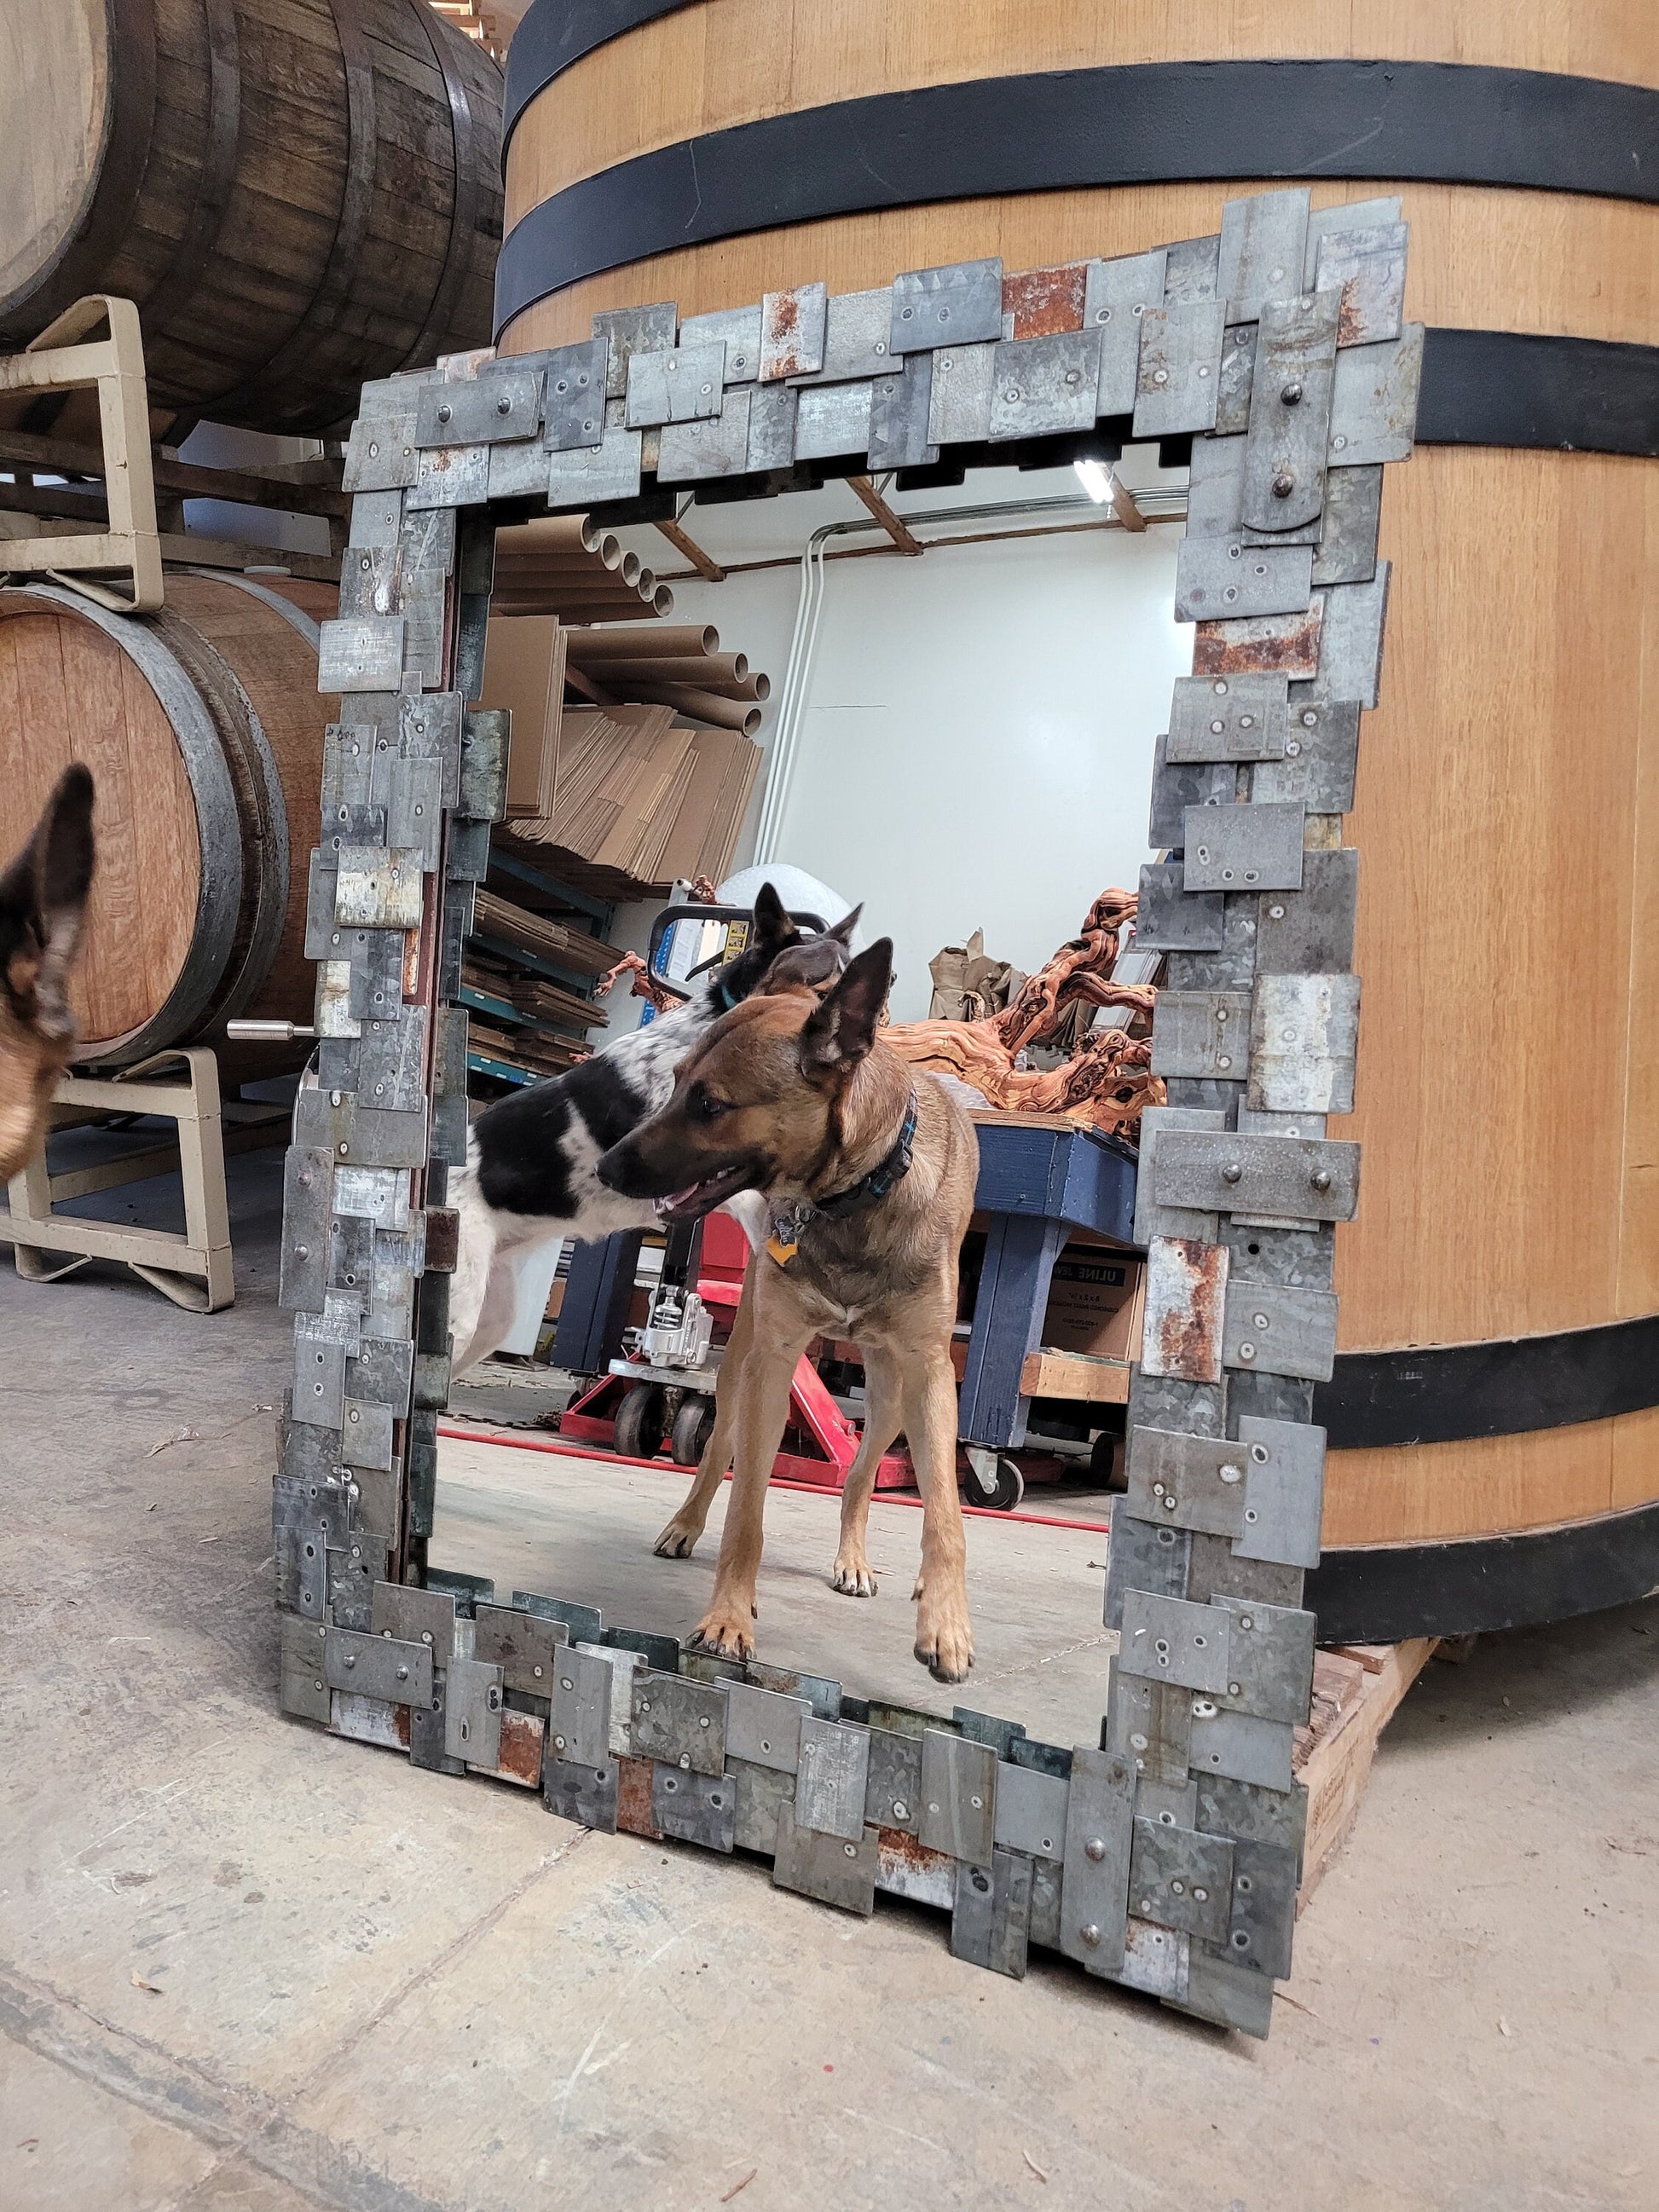 Wine Barrel Ring Mirror - Musa - Made from retired California wine Barrel rings. 100% Recycled!